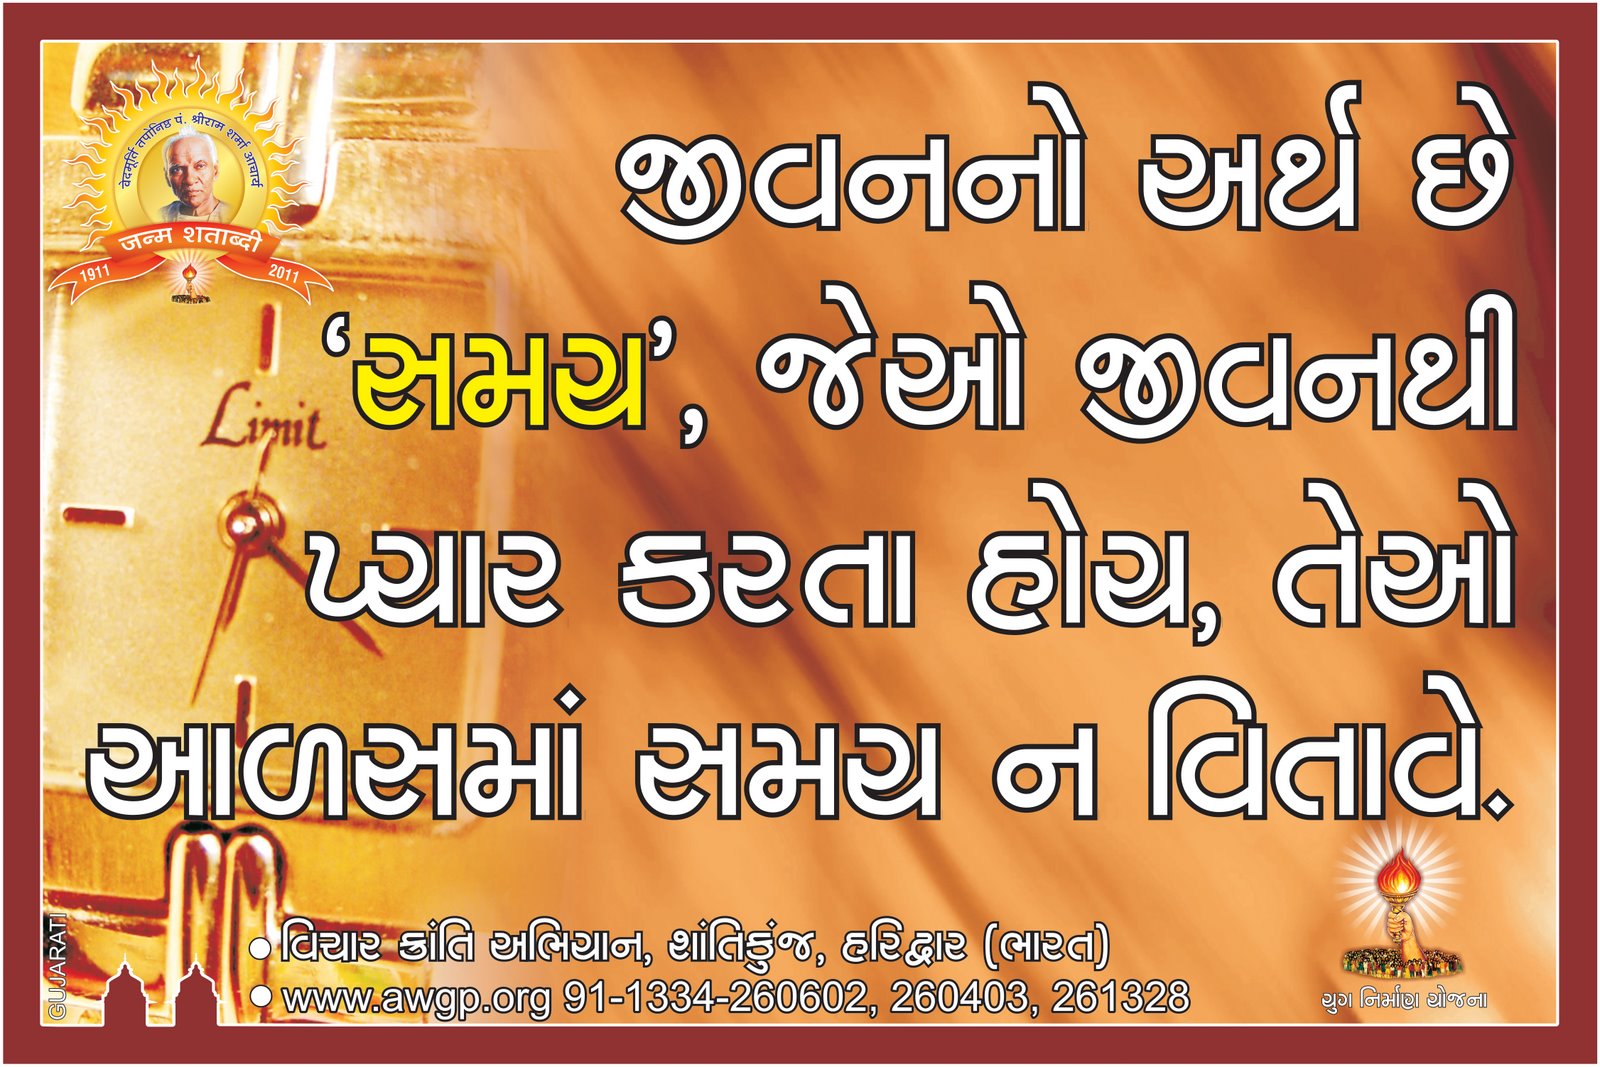 This shows the strength of the good morning suvichar gujarati. 